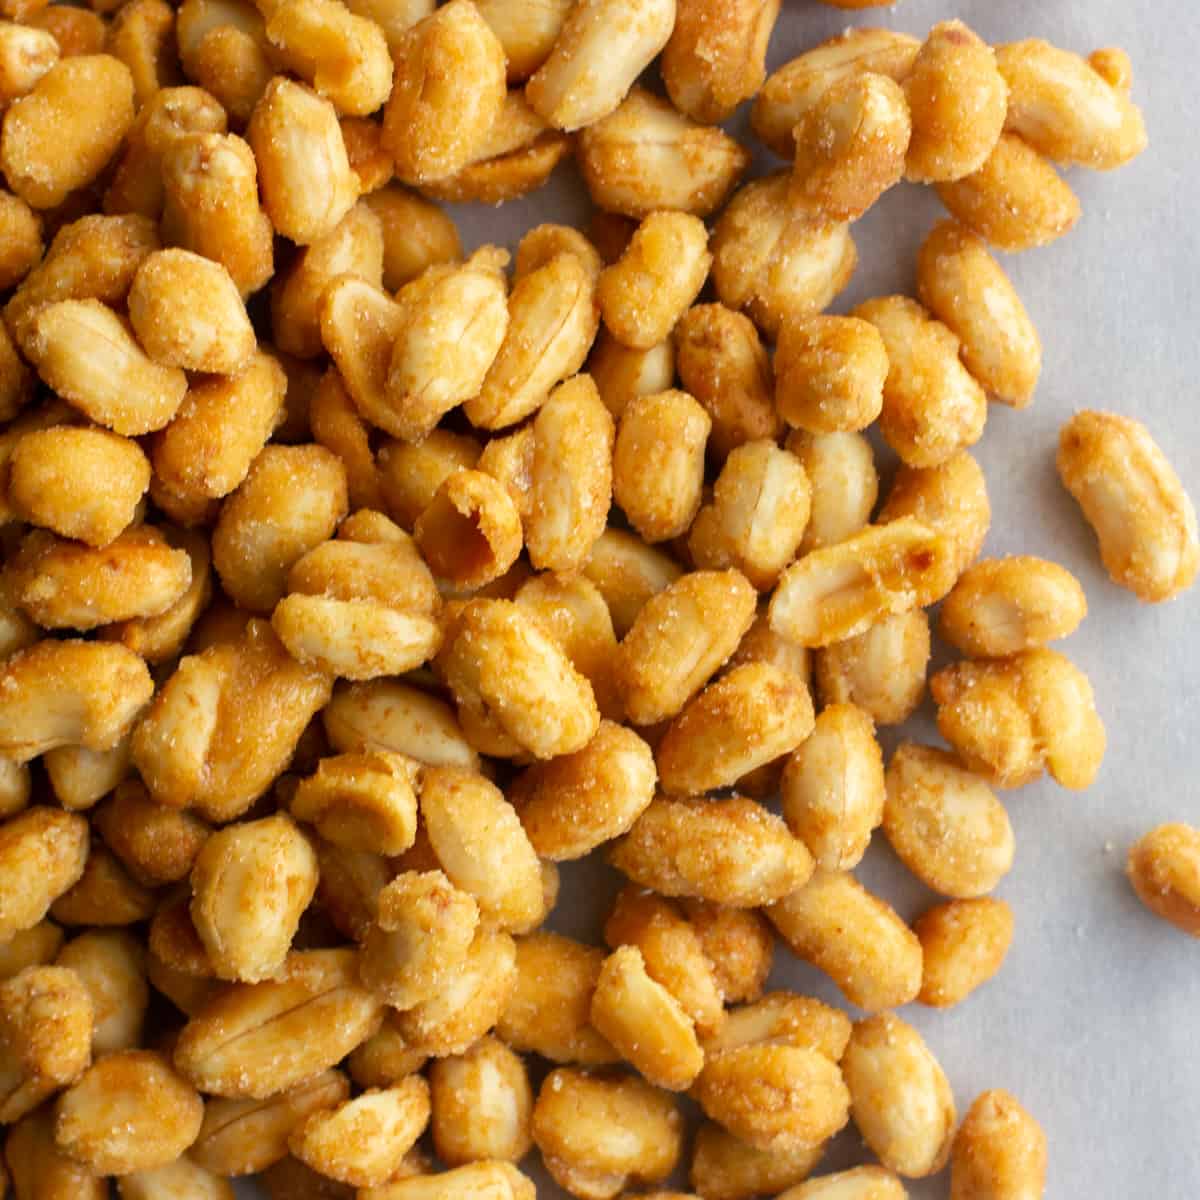 Honey Roasted Peanuts - How to recipe directions